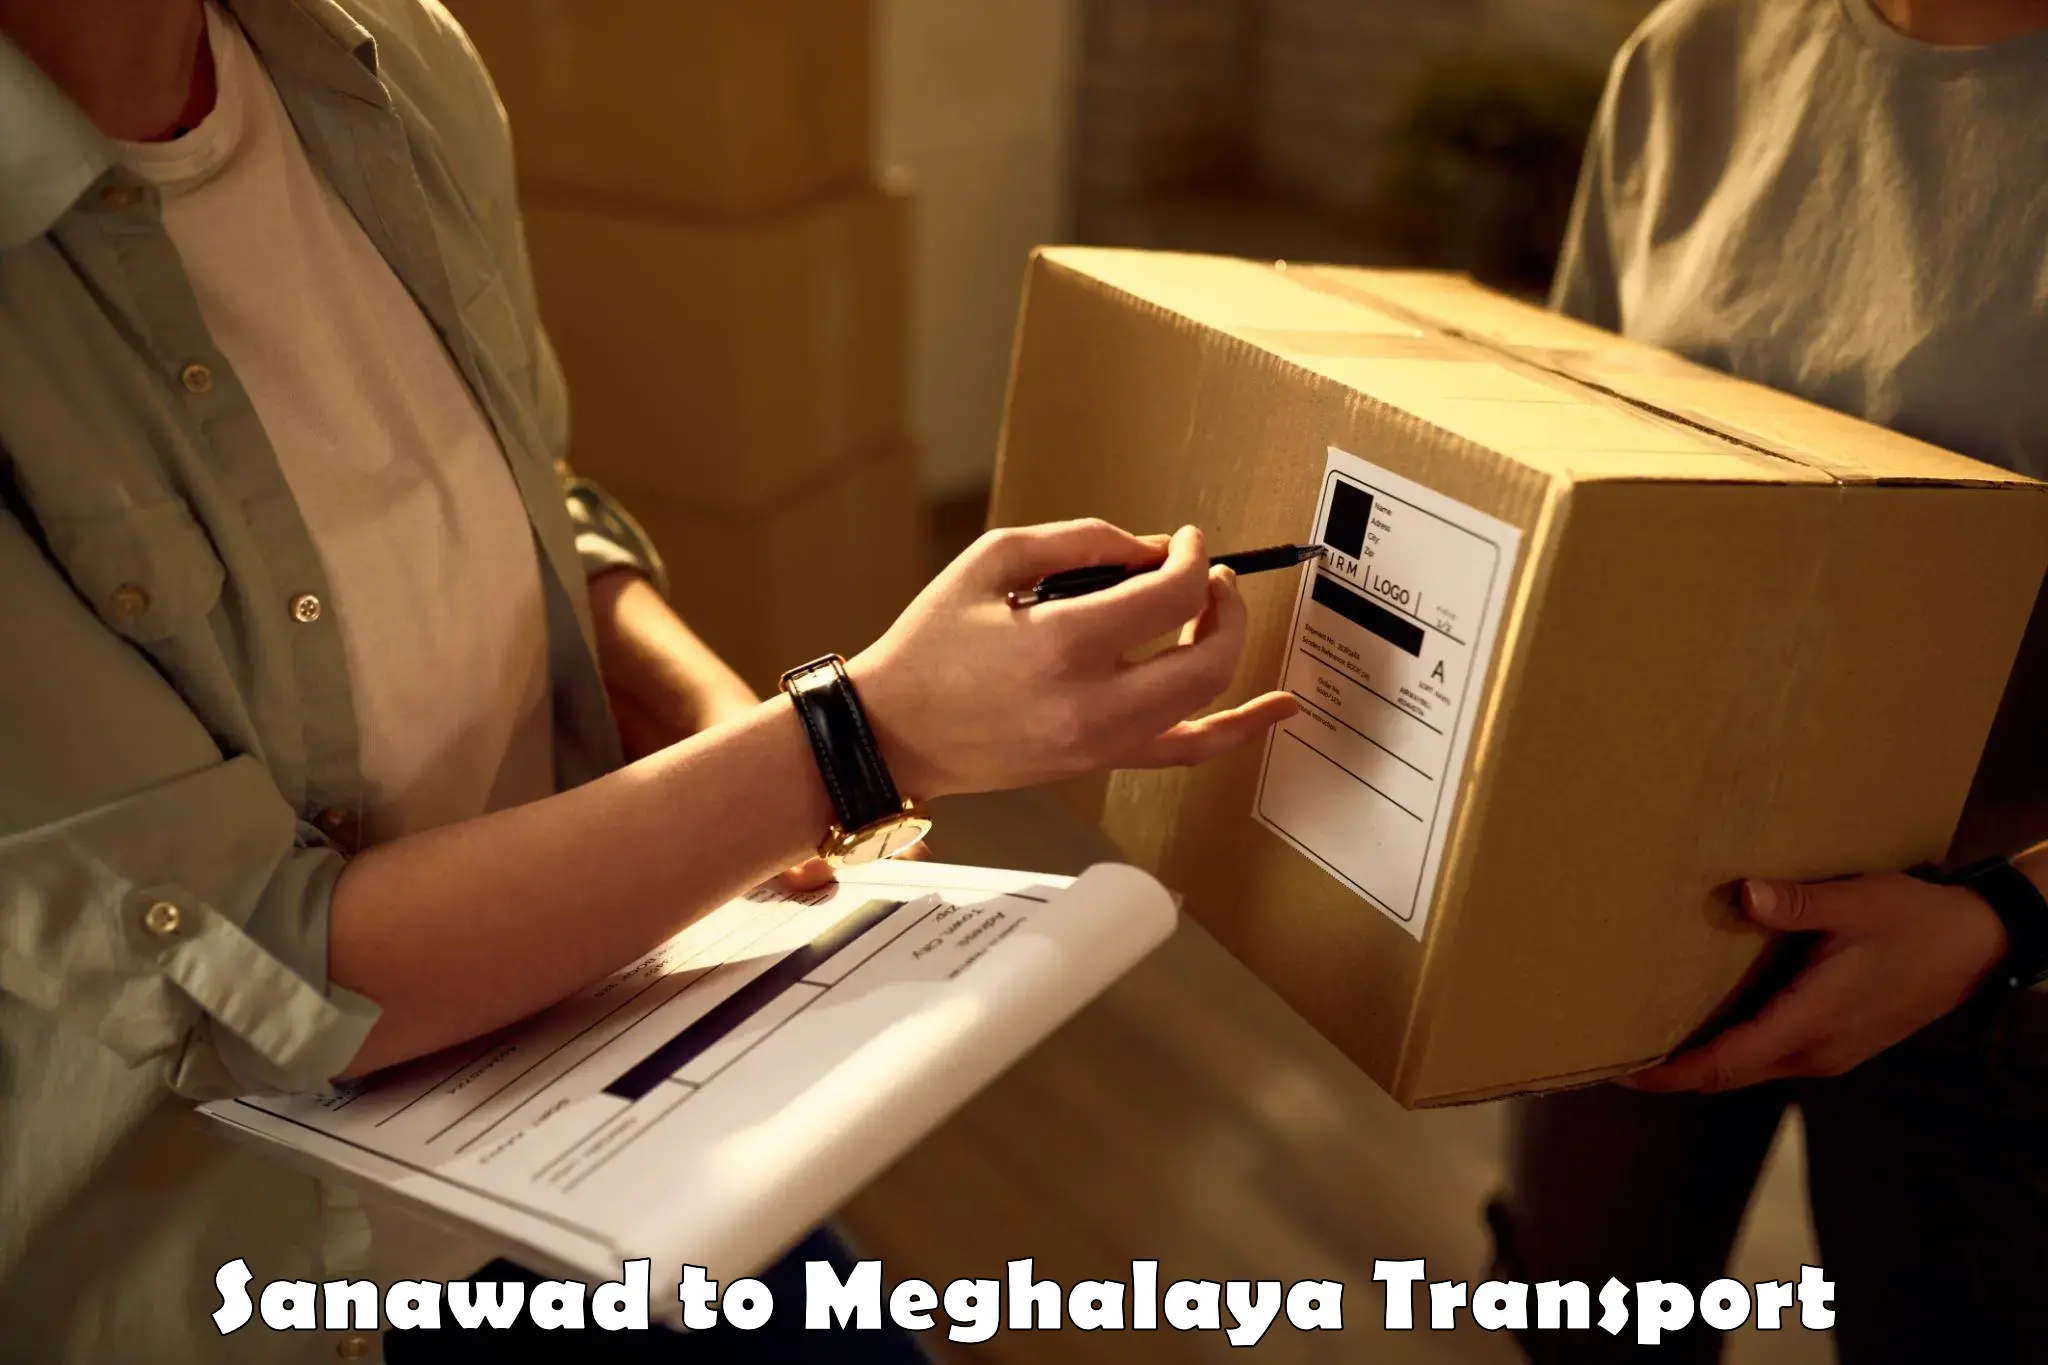 Package delivery services Sanawad to Dkhiah West